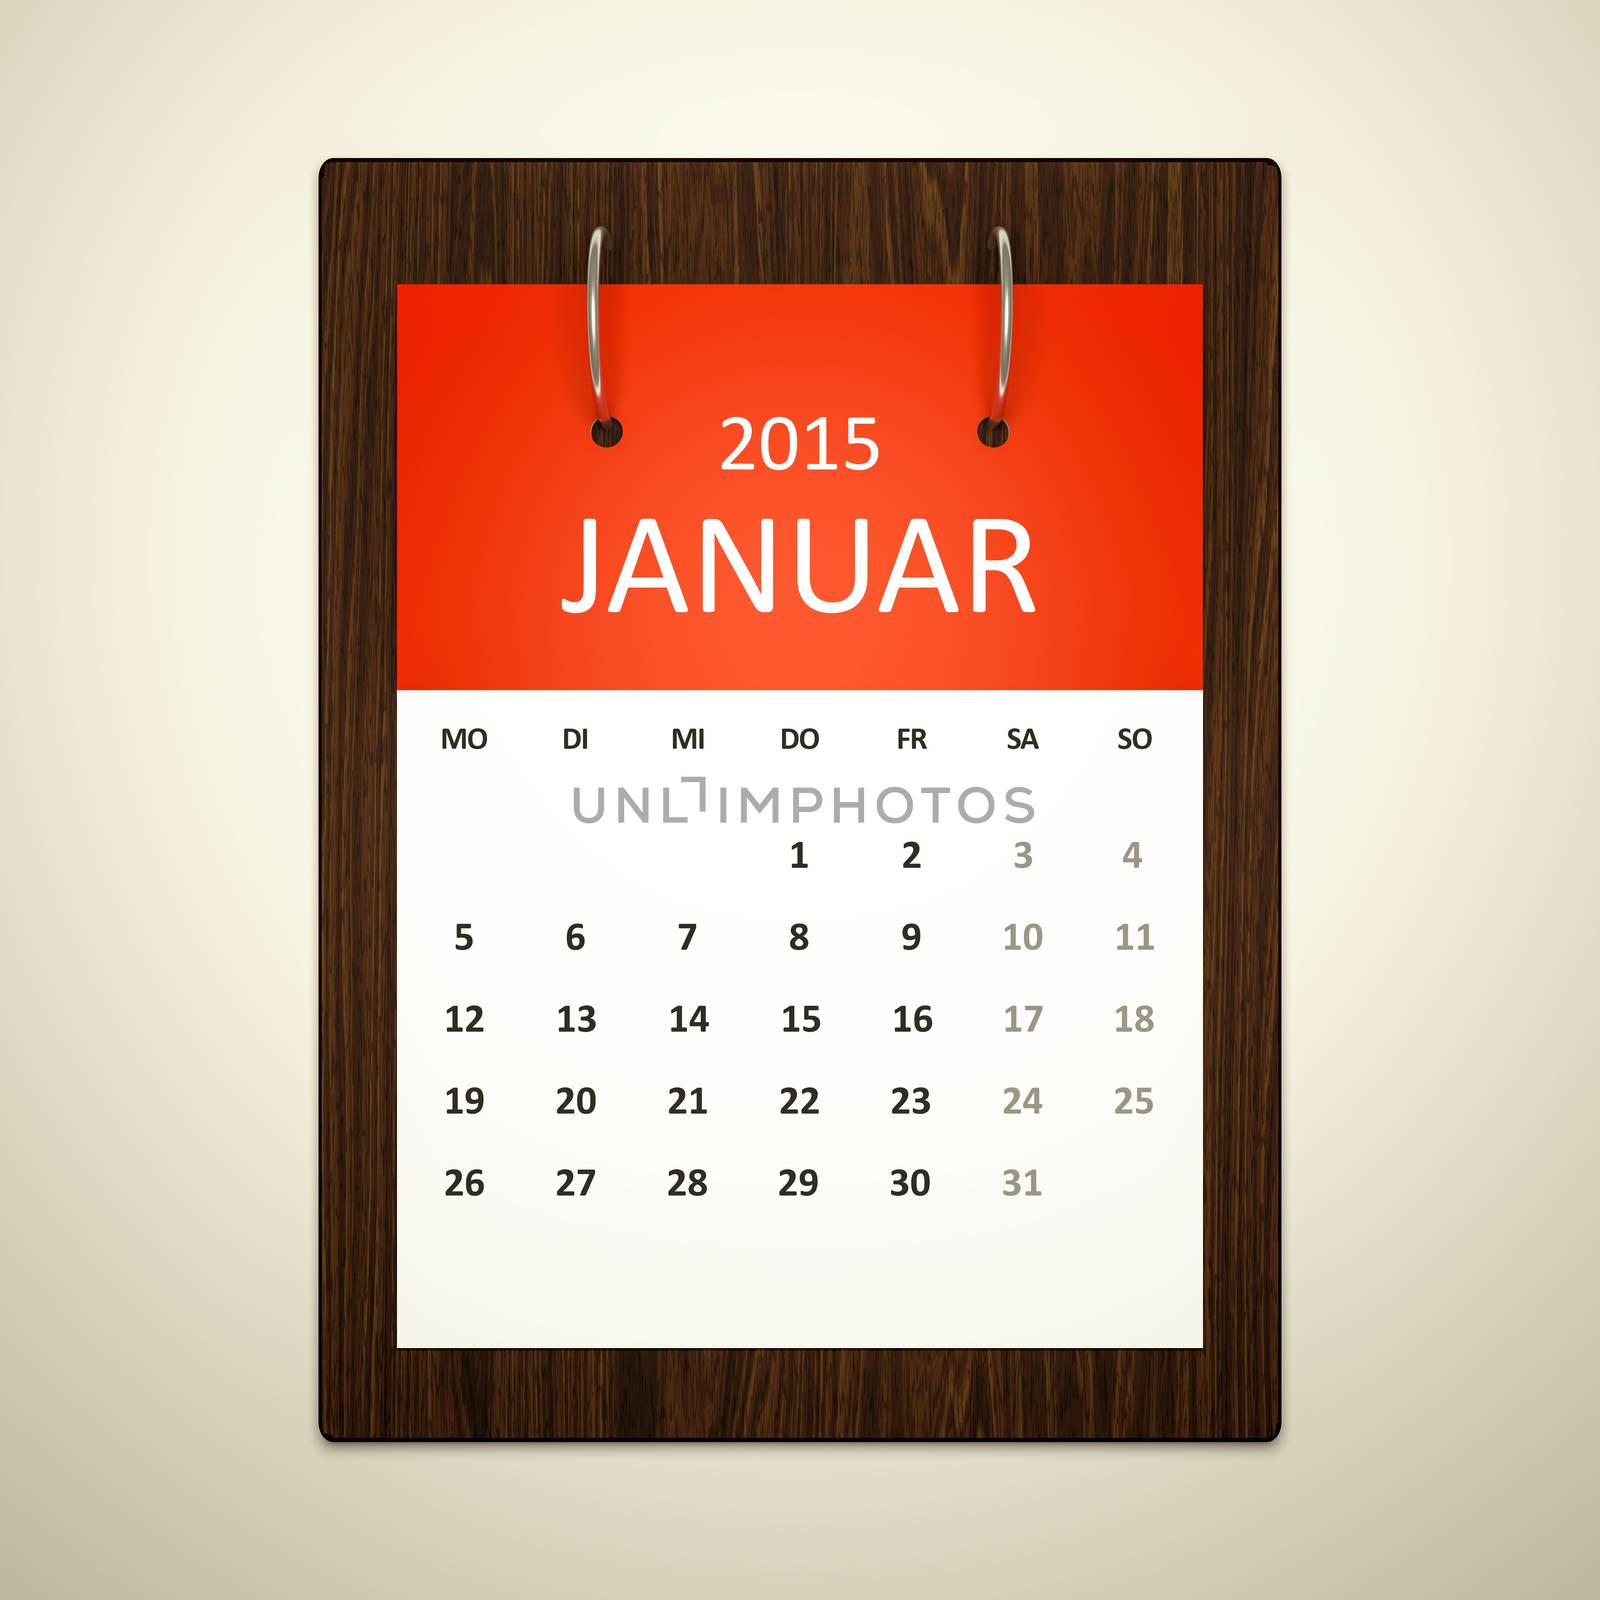 An image of a german calendar for event planning january 2015